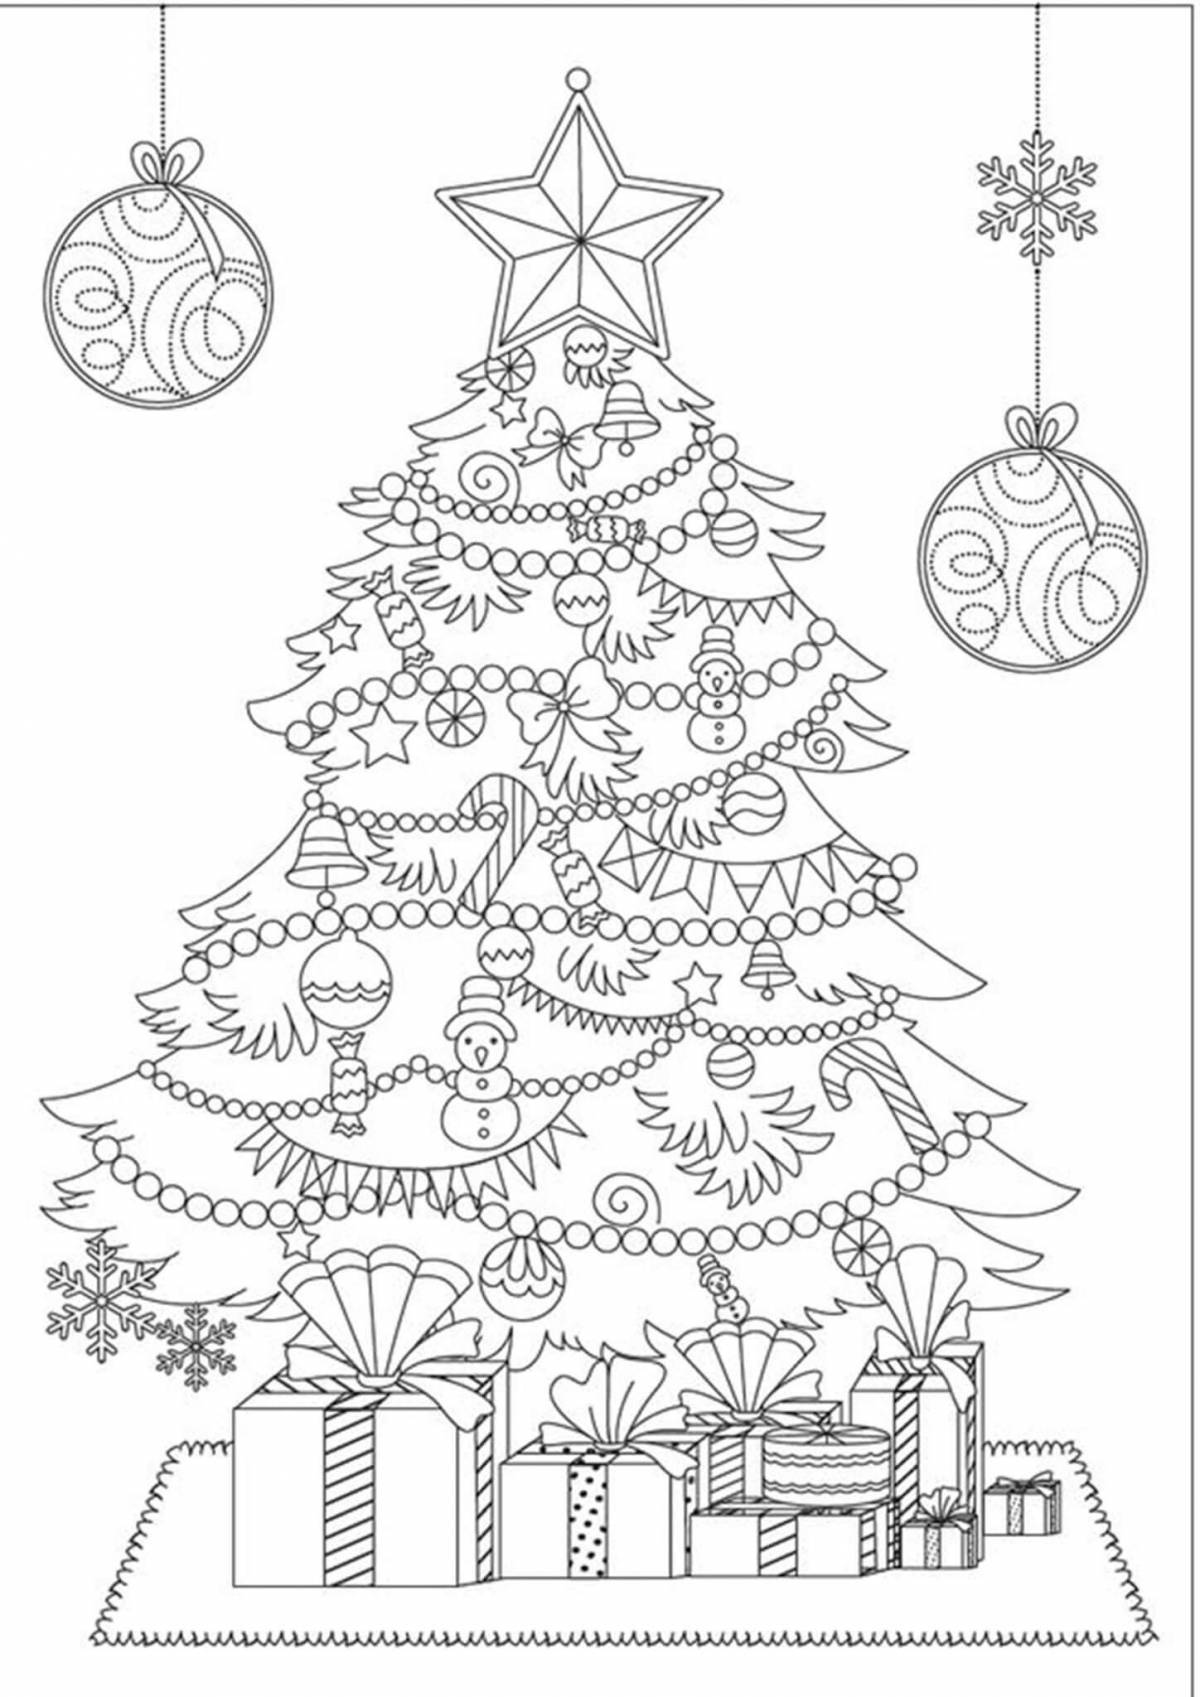 Decorated Christmas tree coloring book